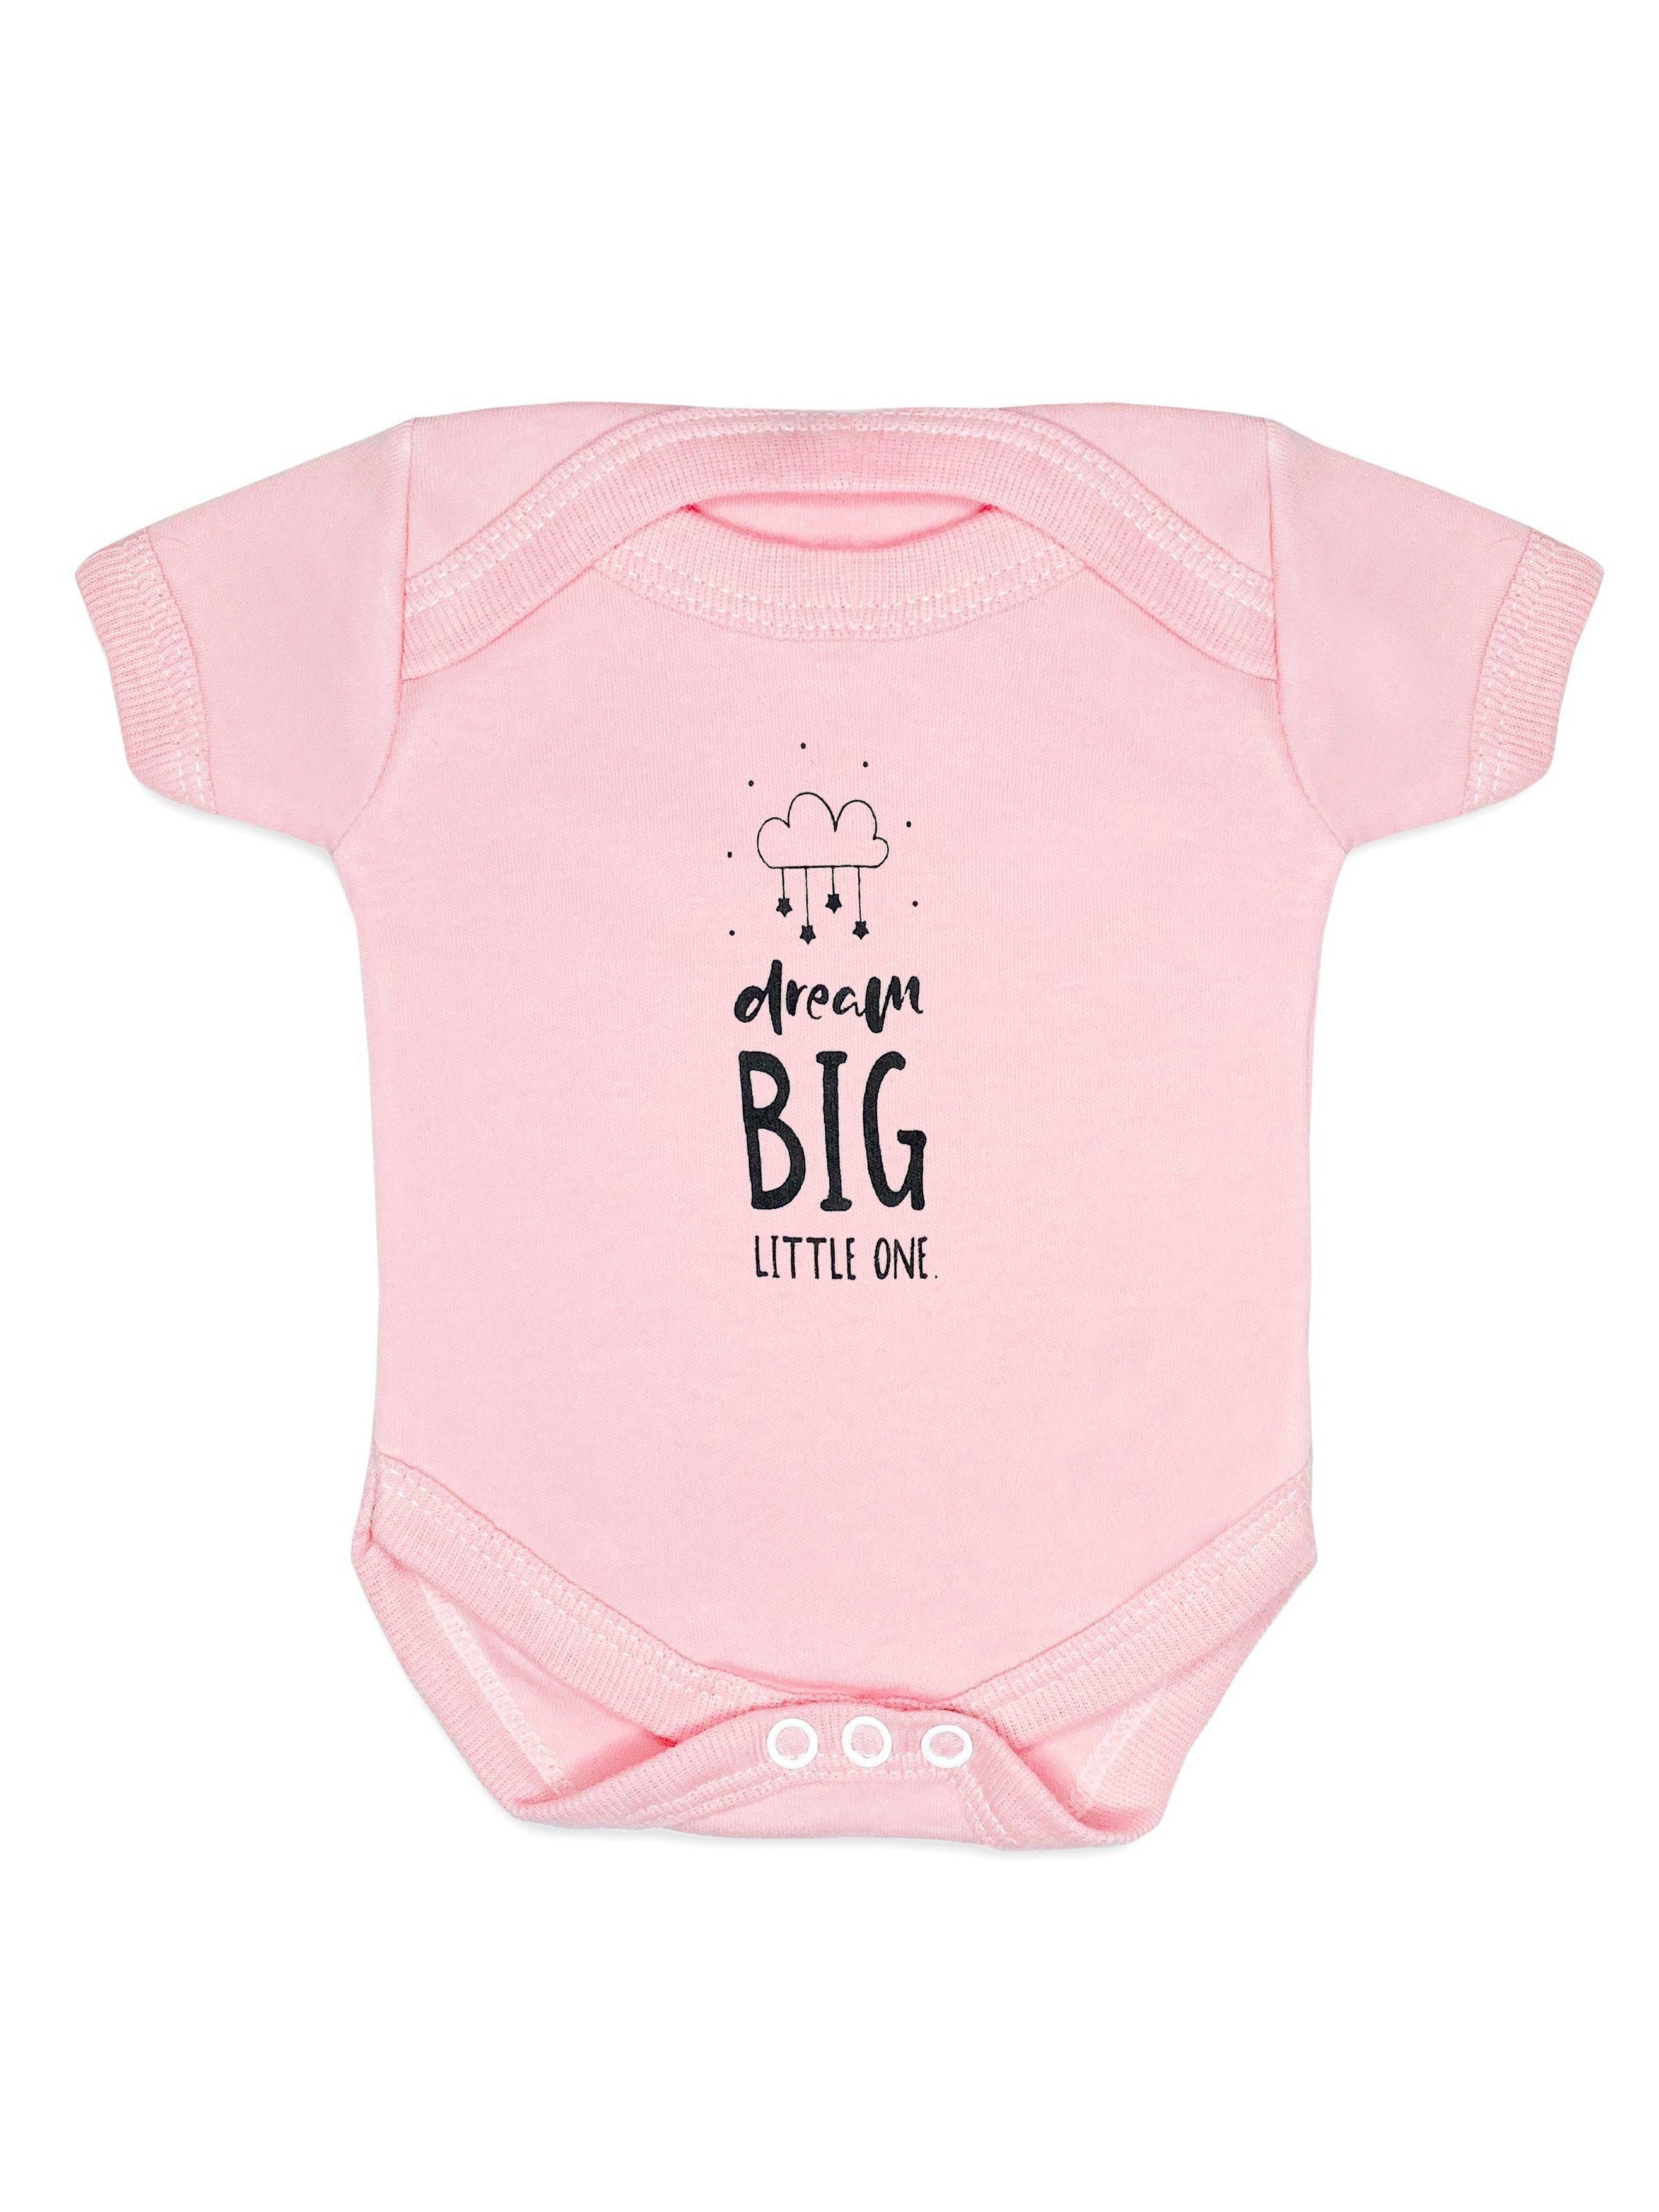 "Dream Big Little One" Bodysuit - Pink Bodysuit / Vest Little Mouse Baby Clothing & Gifts 